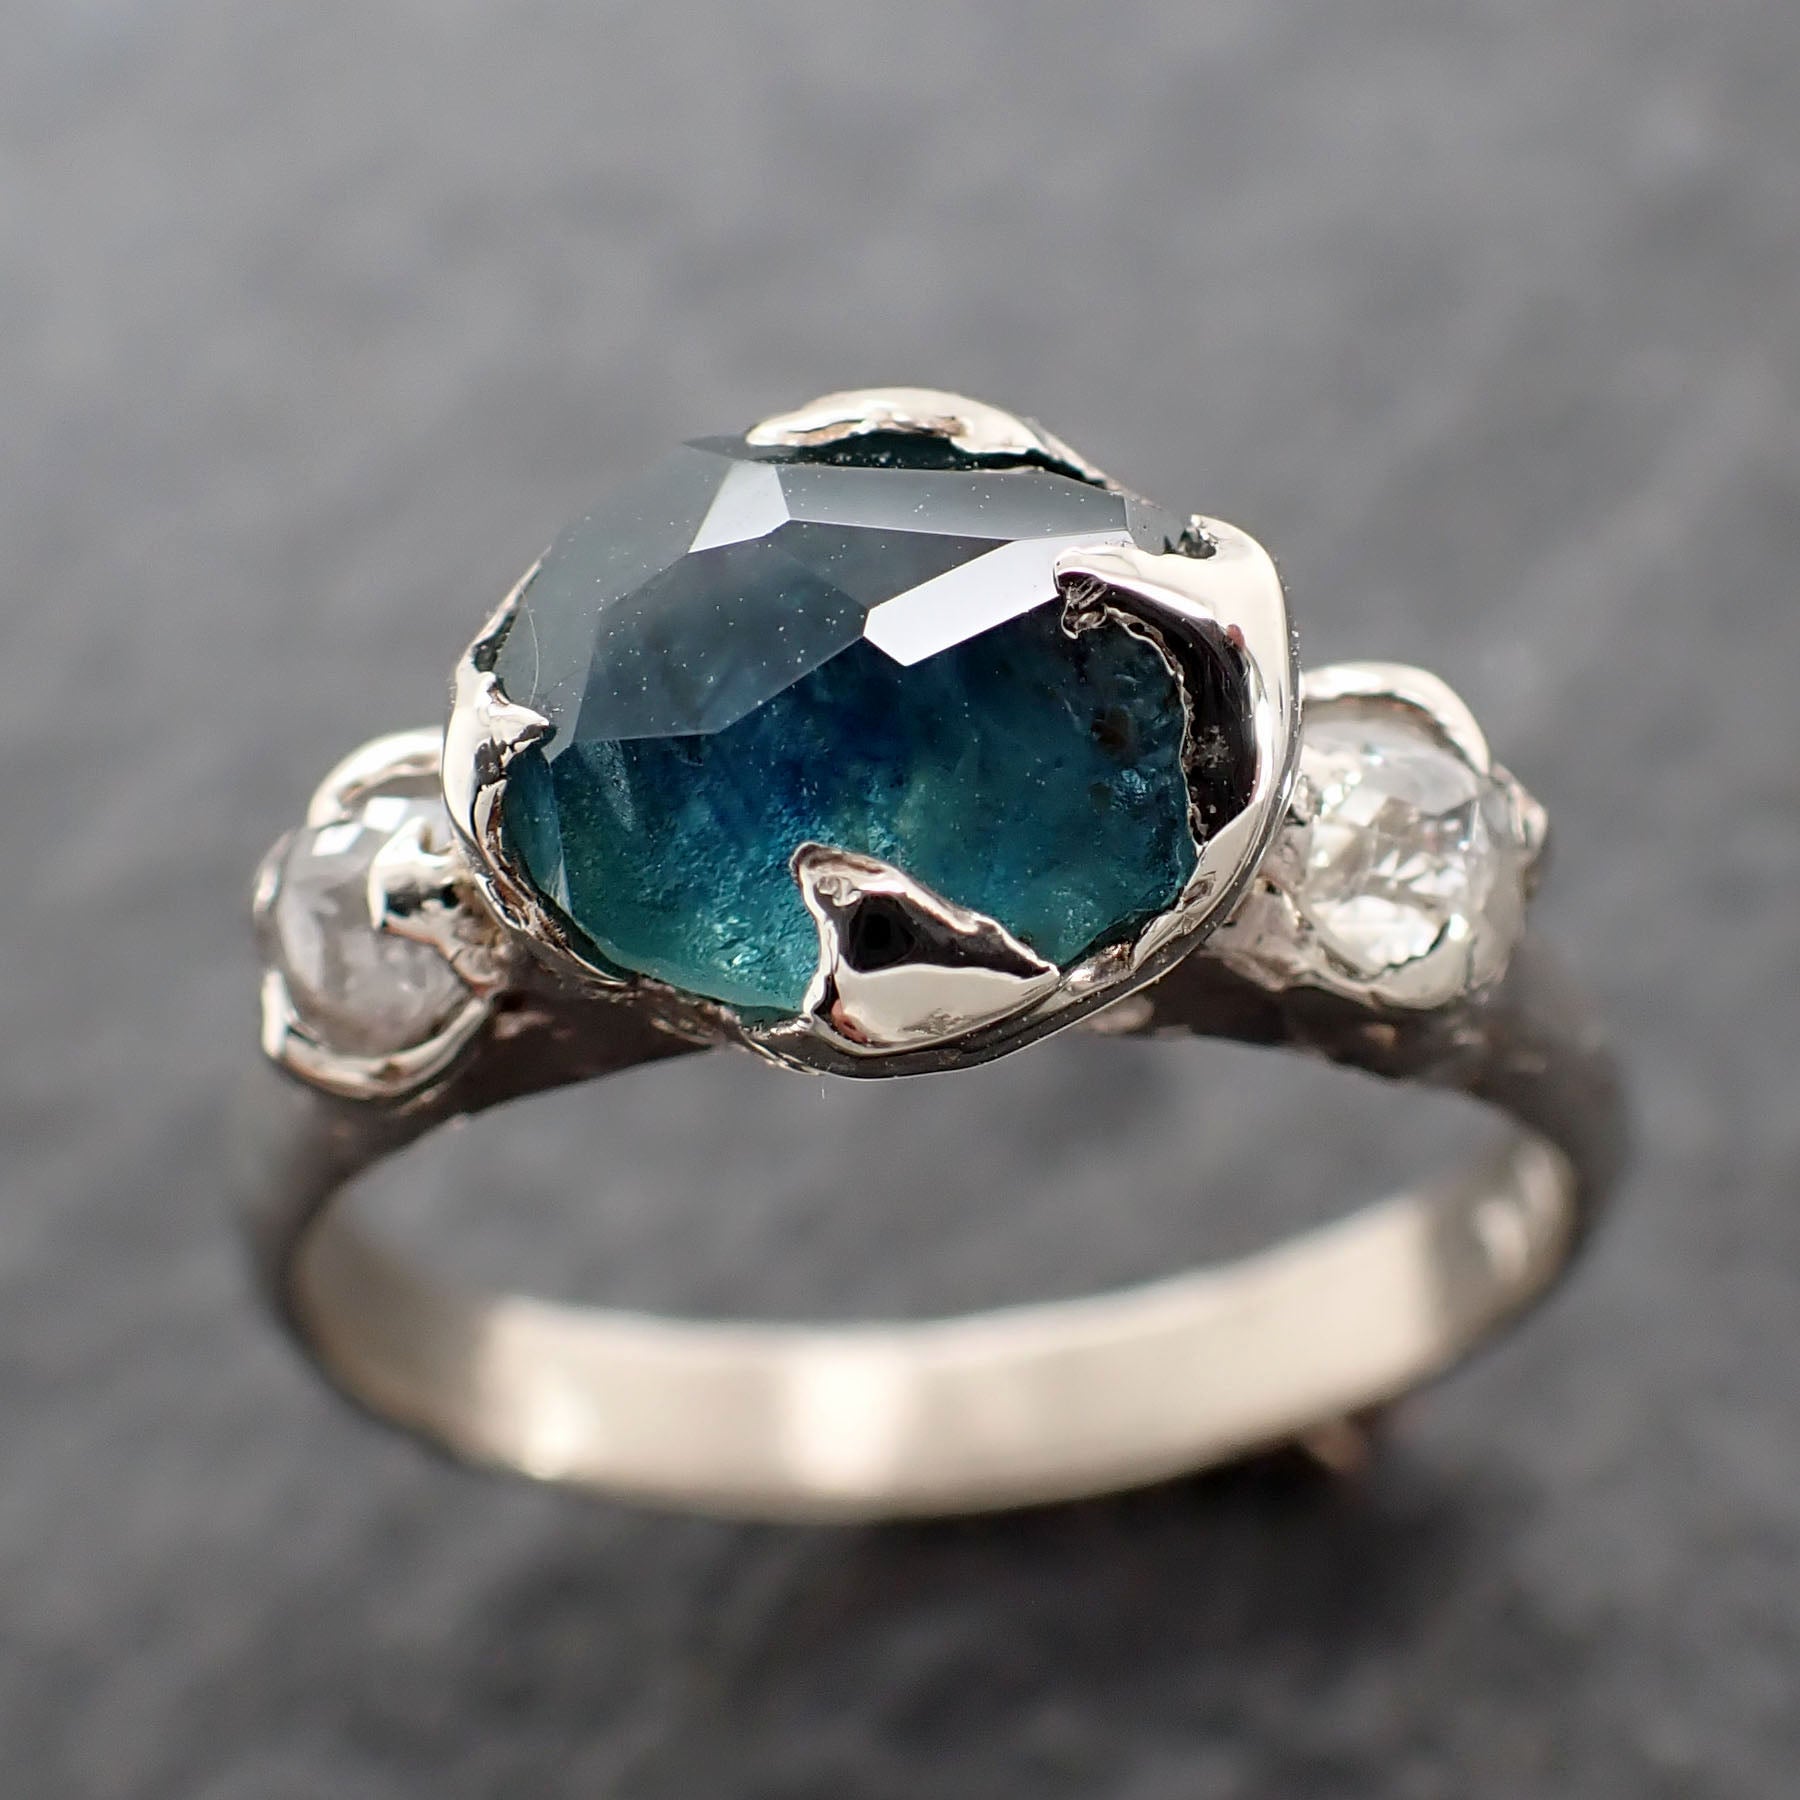 partially faceted blue montana sapphire and fancy diamonds 14k white gold engagement wedding ring custom gemstone ring multi stone ring 2626 Alternative Engagement